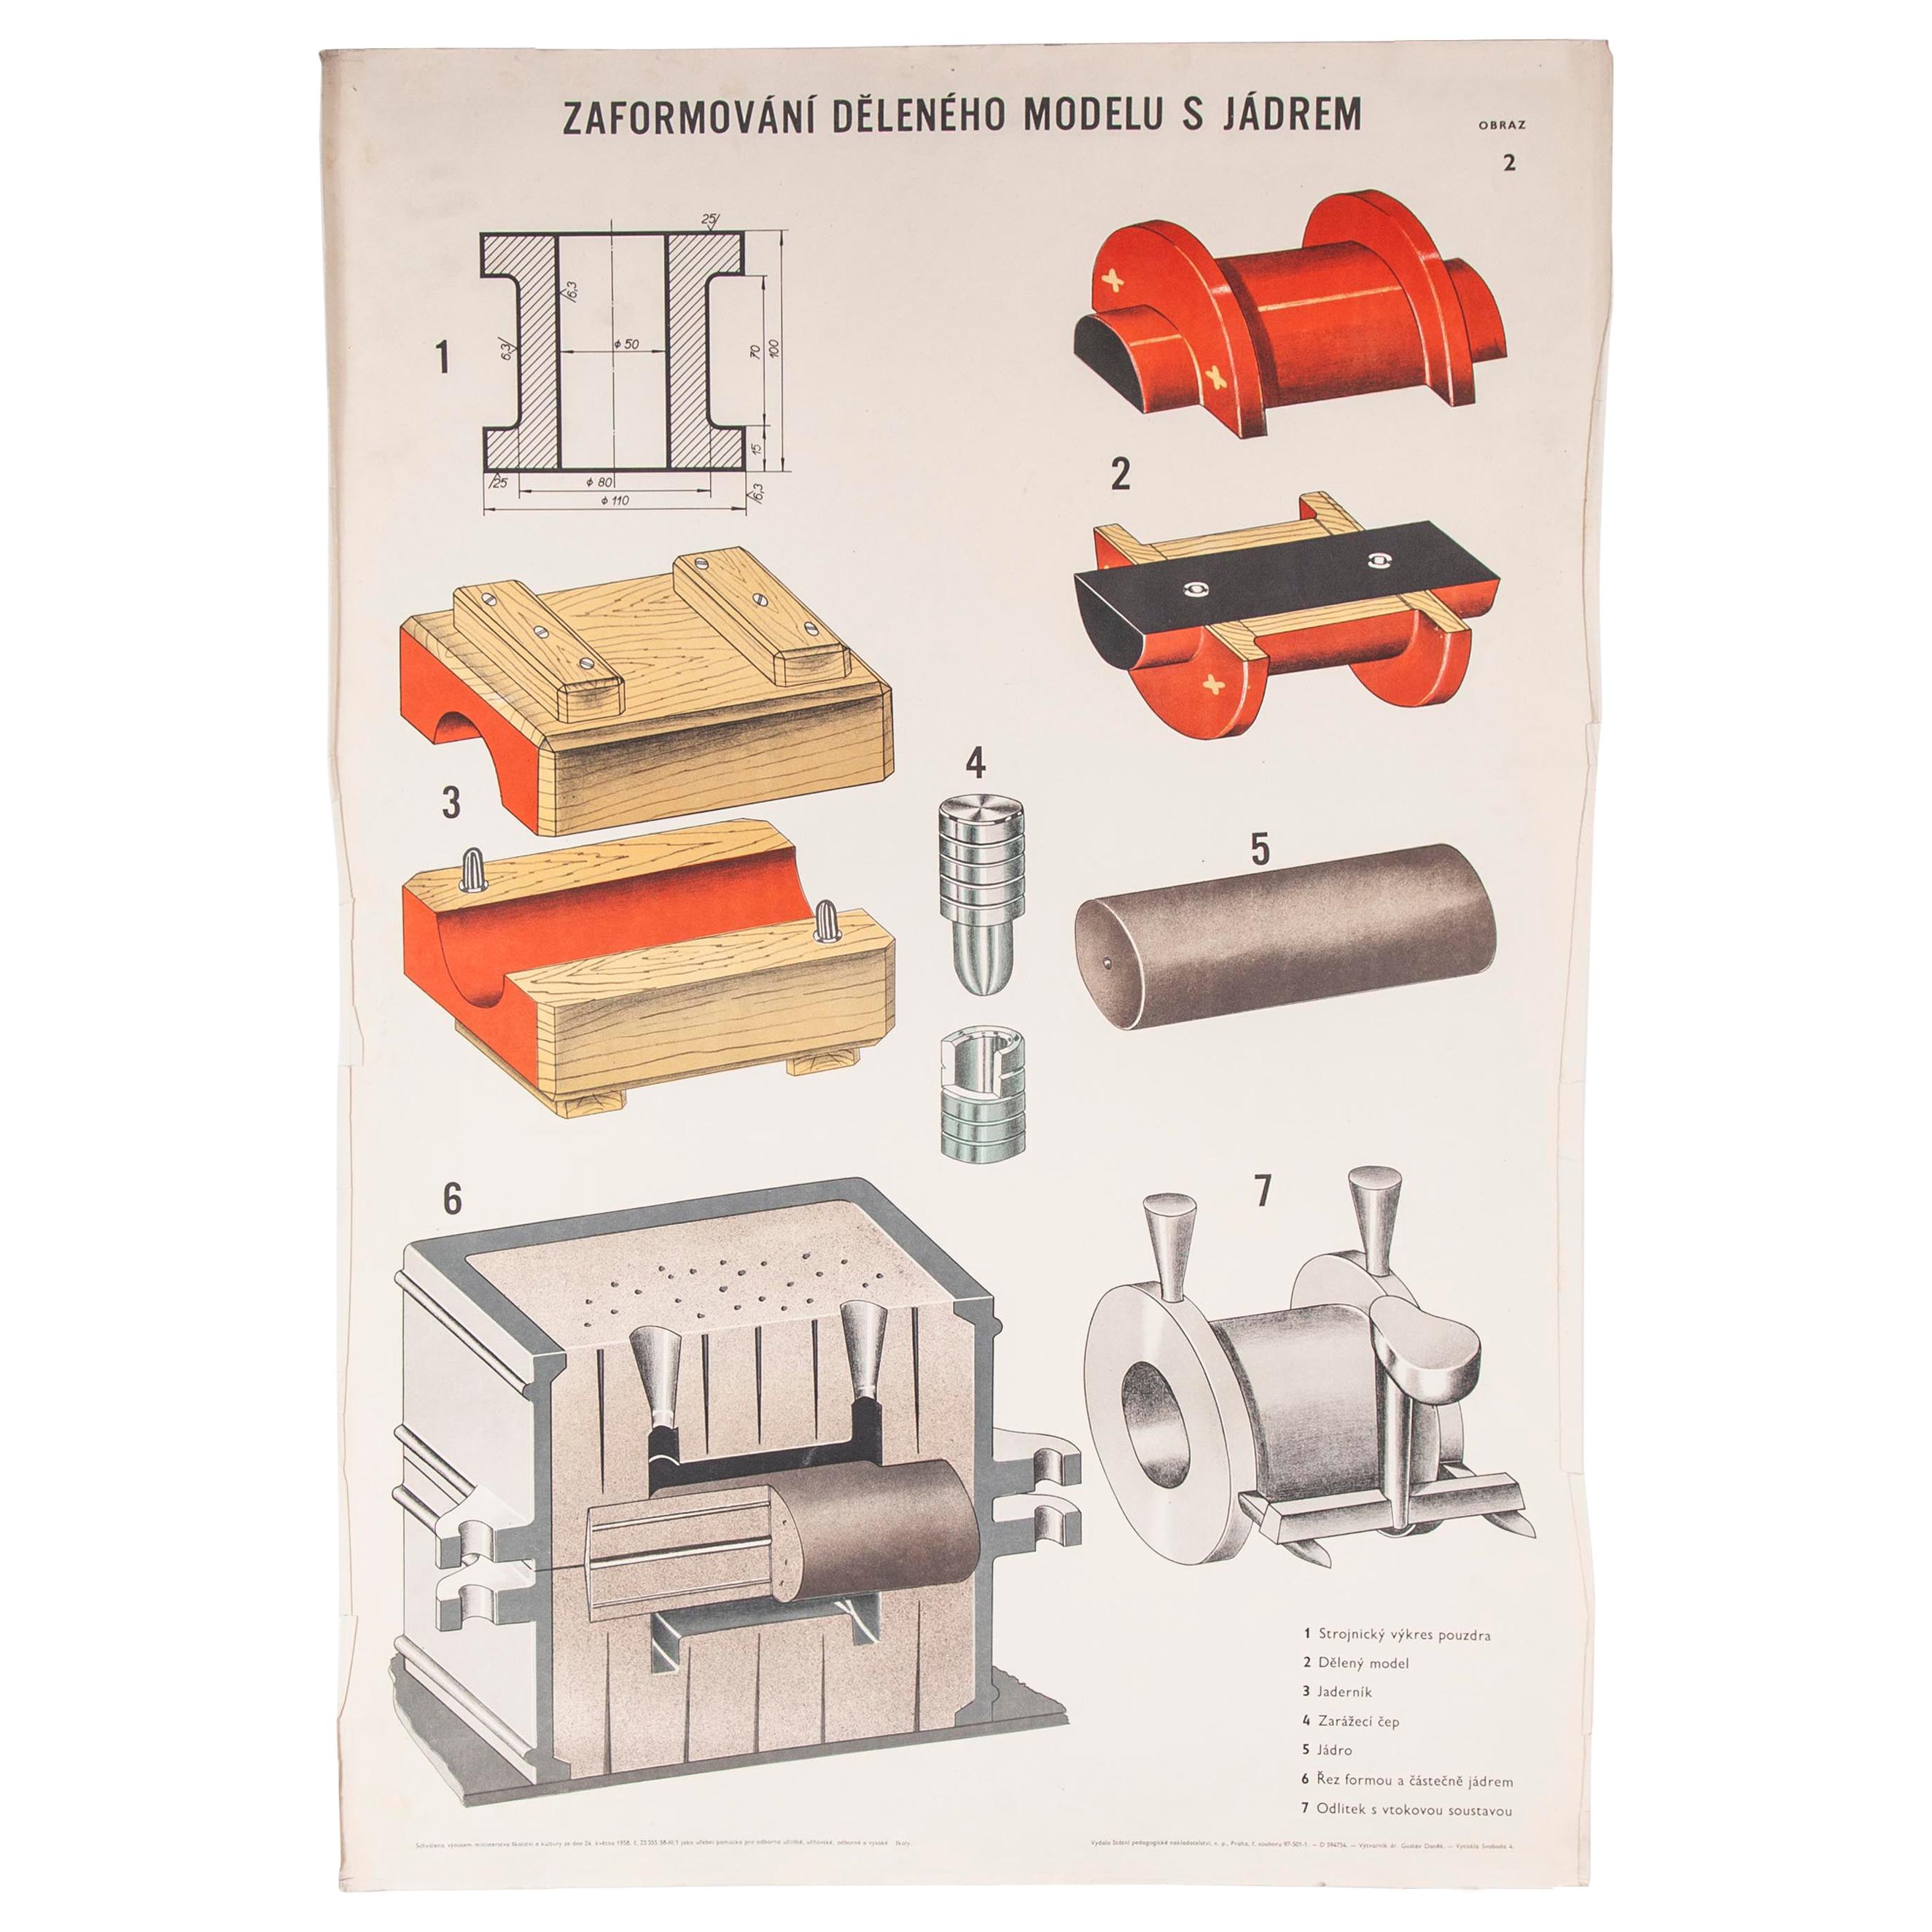 Czech Technical Industrial Drawing, Foundry Mould Engineering Poster, 7